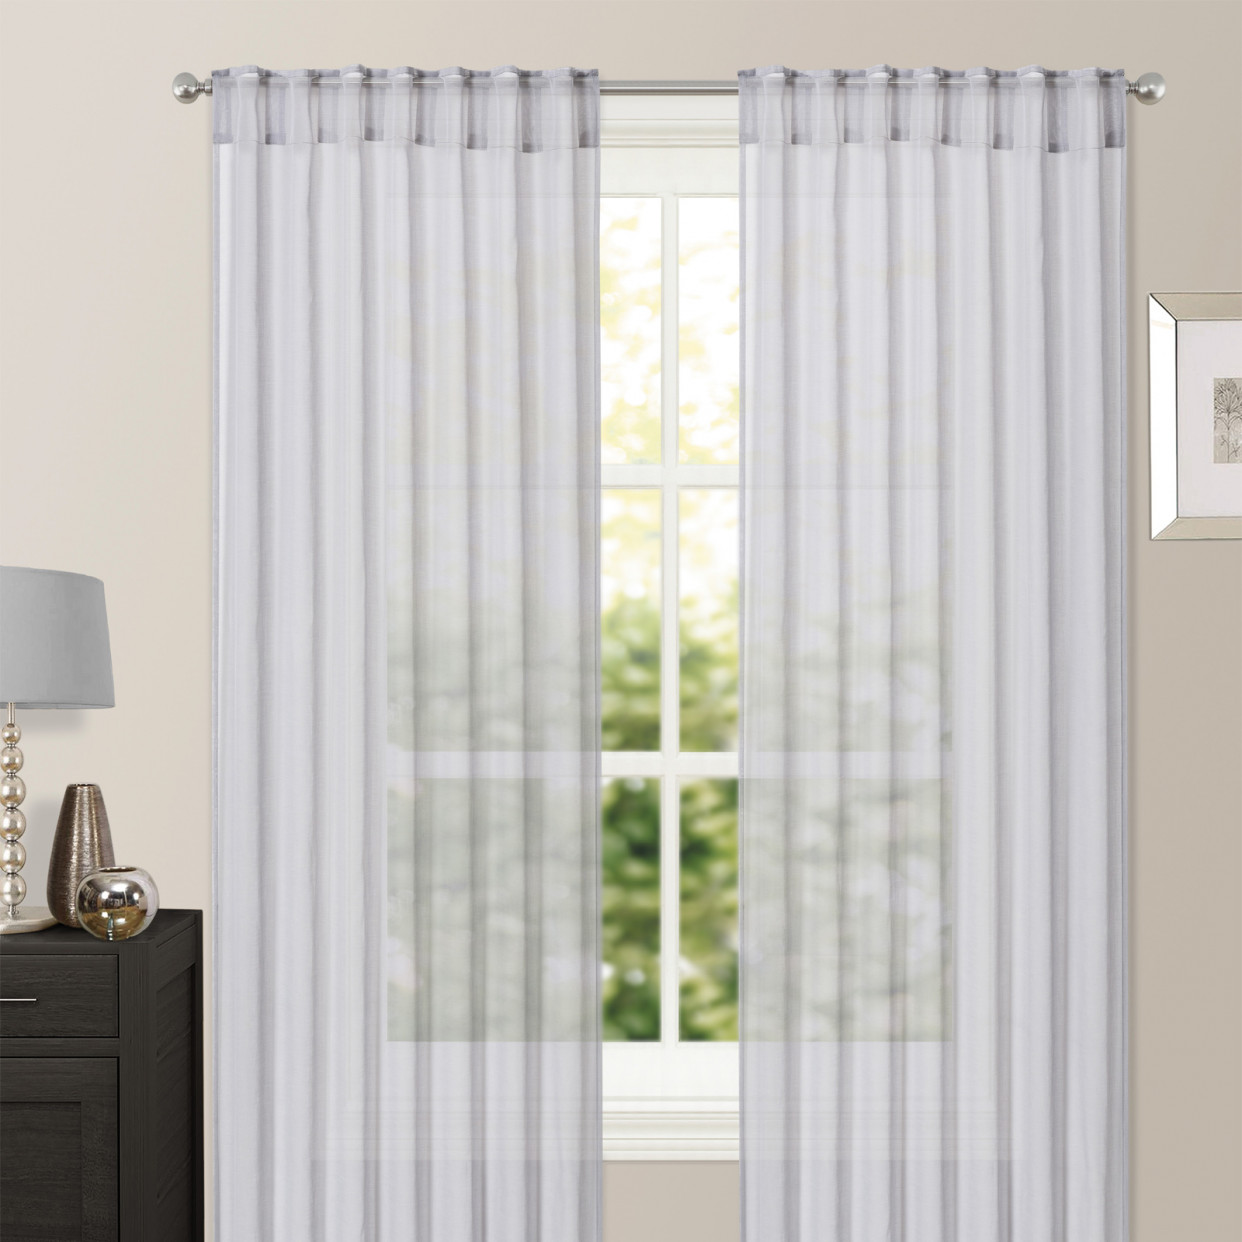 Brentfords Sheer Voile Curtains, Silver - 140 x 226cm (55" x 89")>